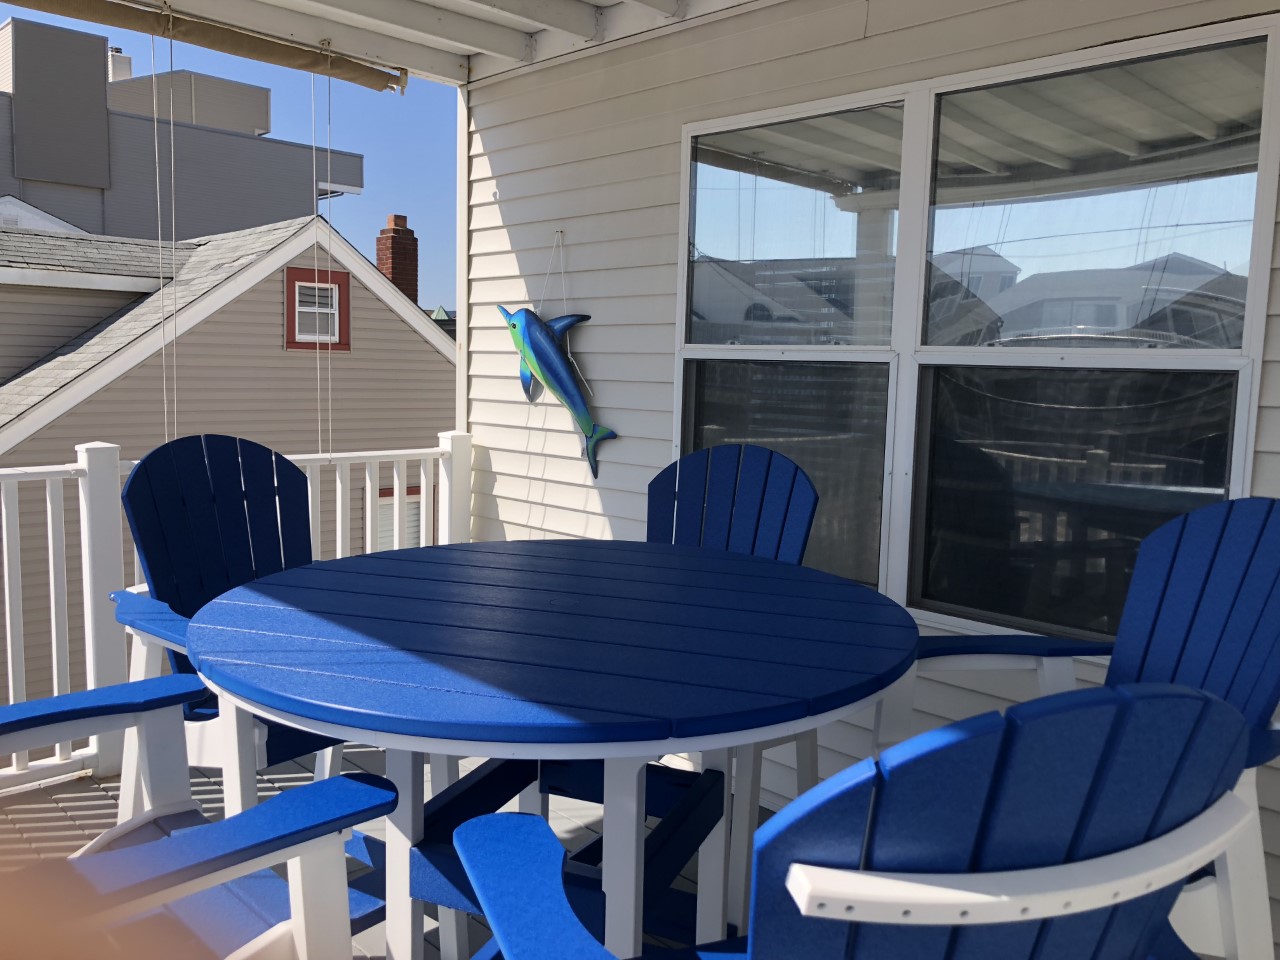 411 EAST 3RD AVENUE UNIT A NORTH WILDWOOD SUMMER VACATION RENTALS at